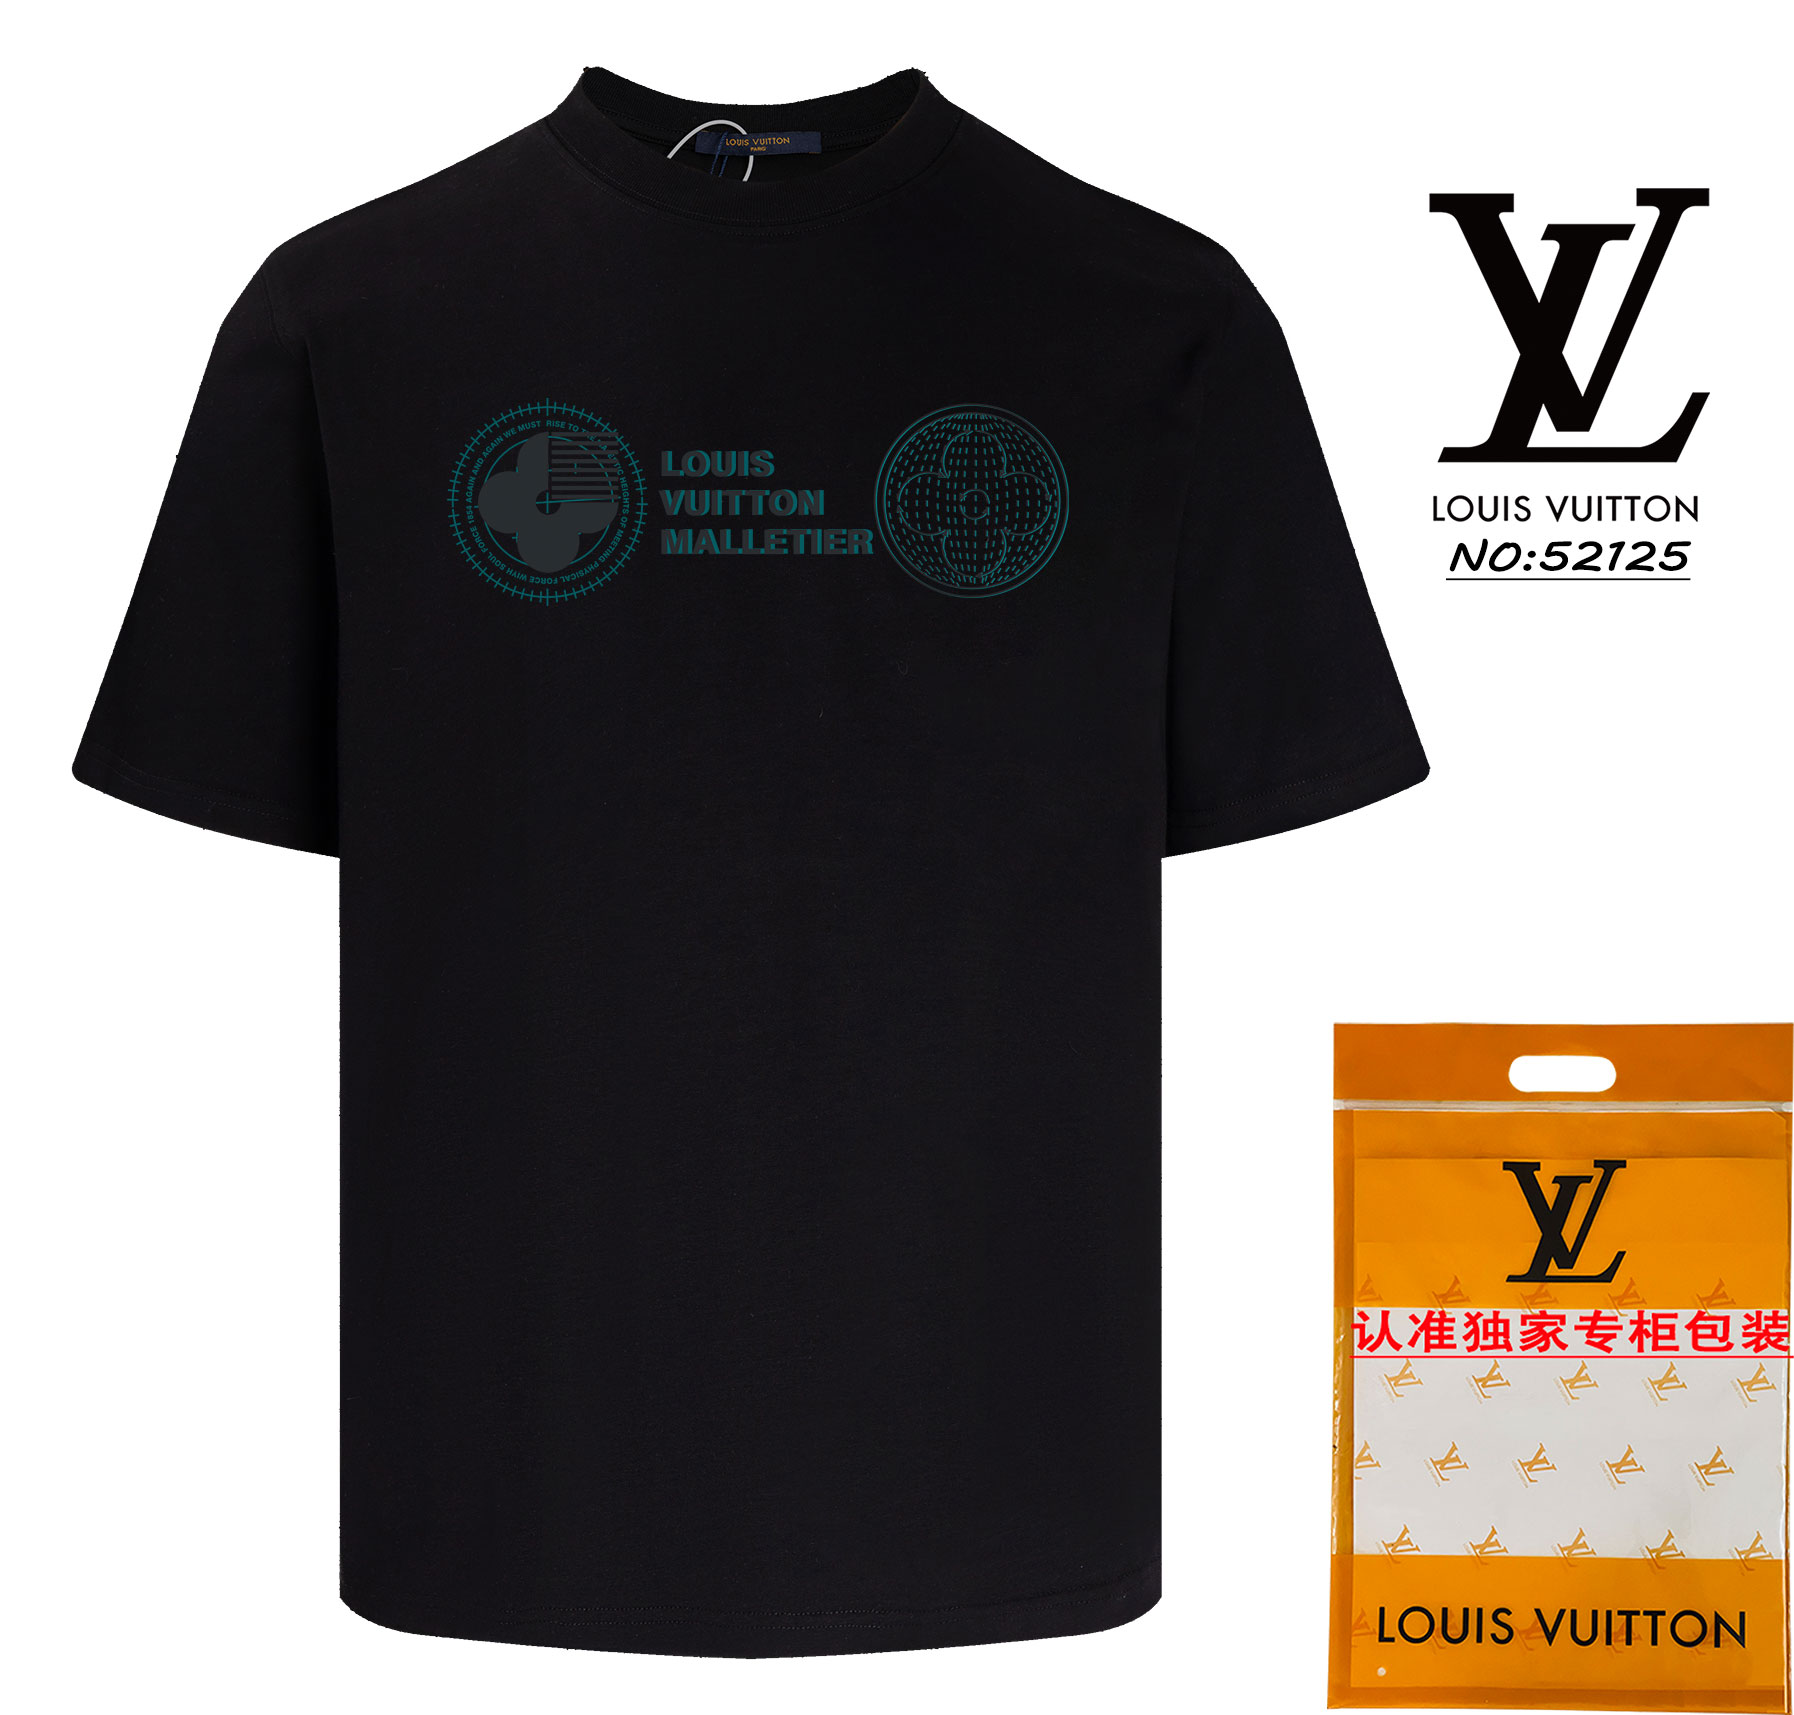 Top brands like
 Louis Vuitton Flawless
 Clothing T-Shirt Apricot Color Black White Unisex Short Sleeve